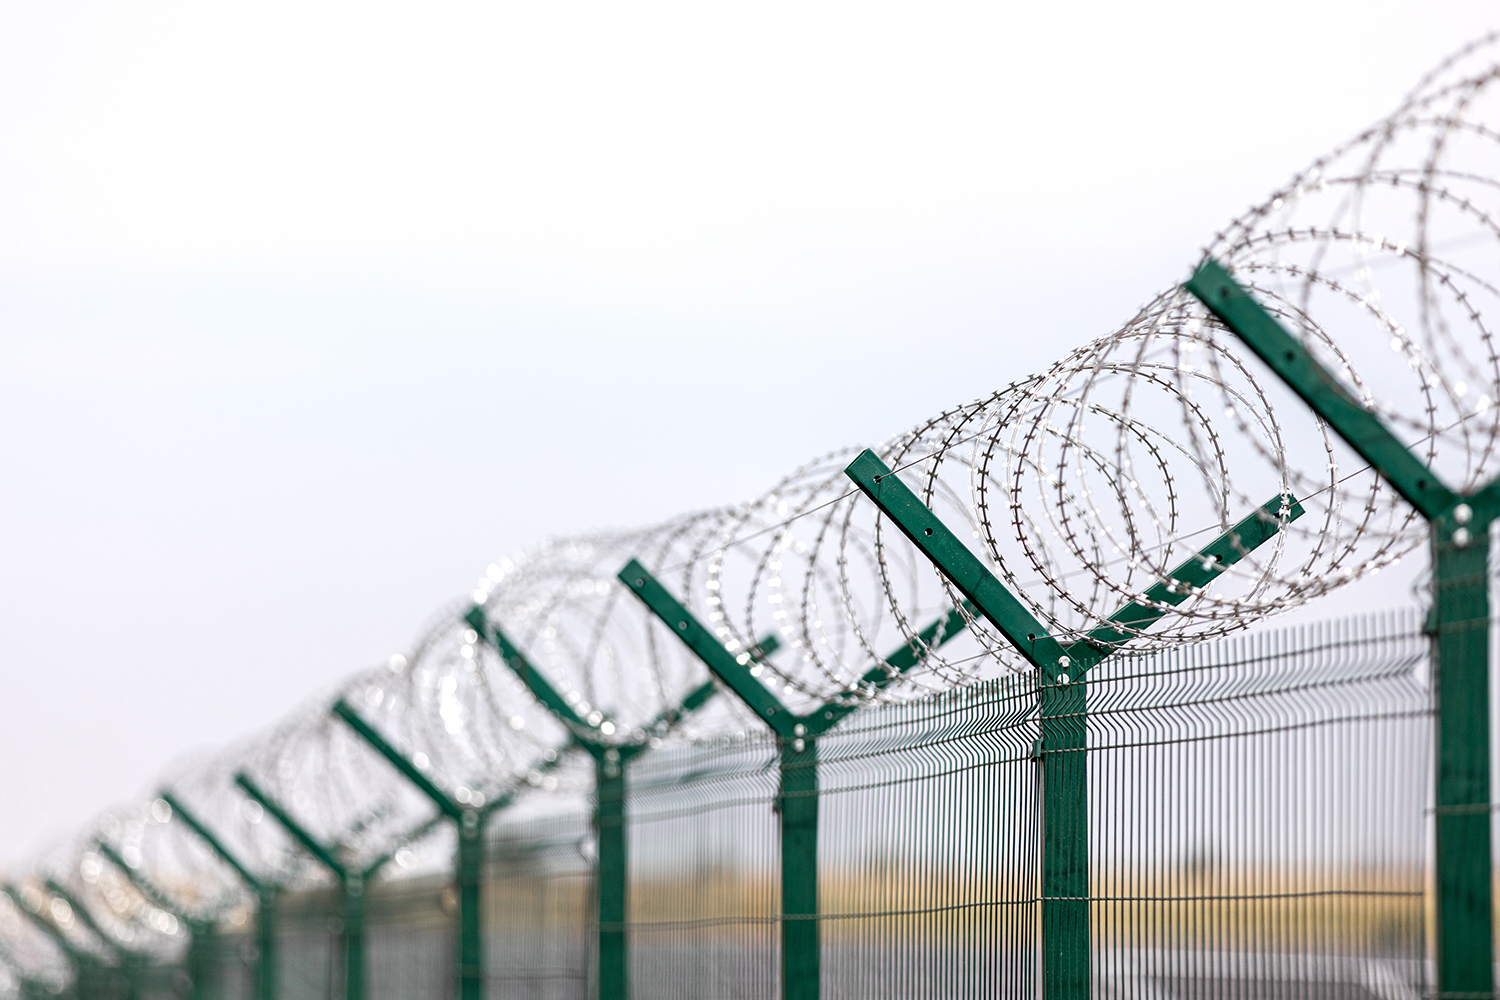 Security with a barbed wire fence. Fencing of sensitive sites with barbed wire